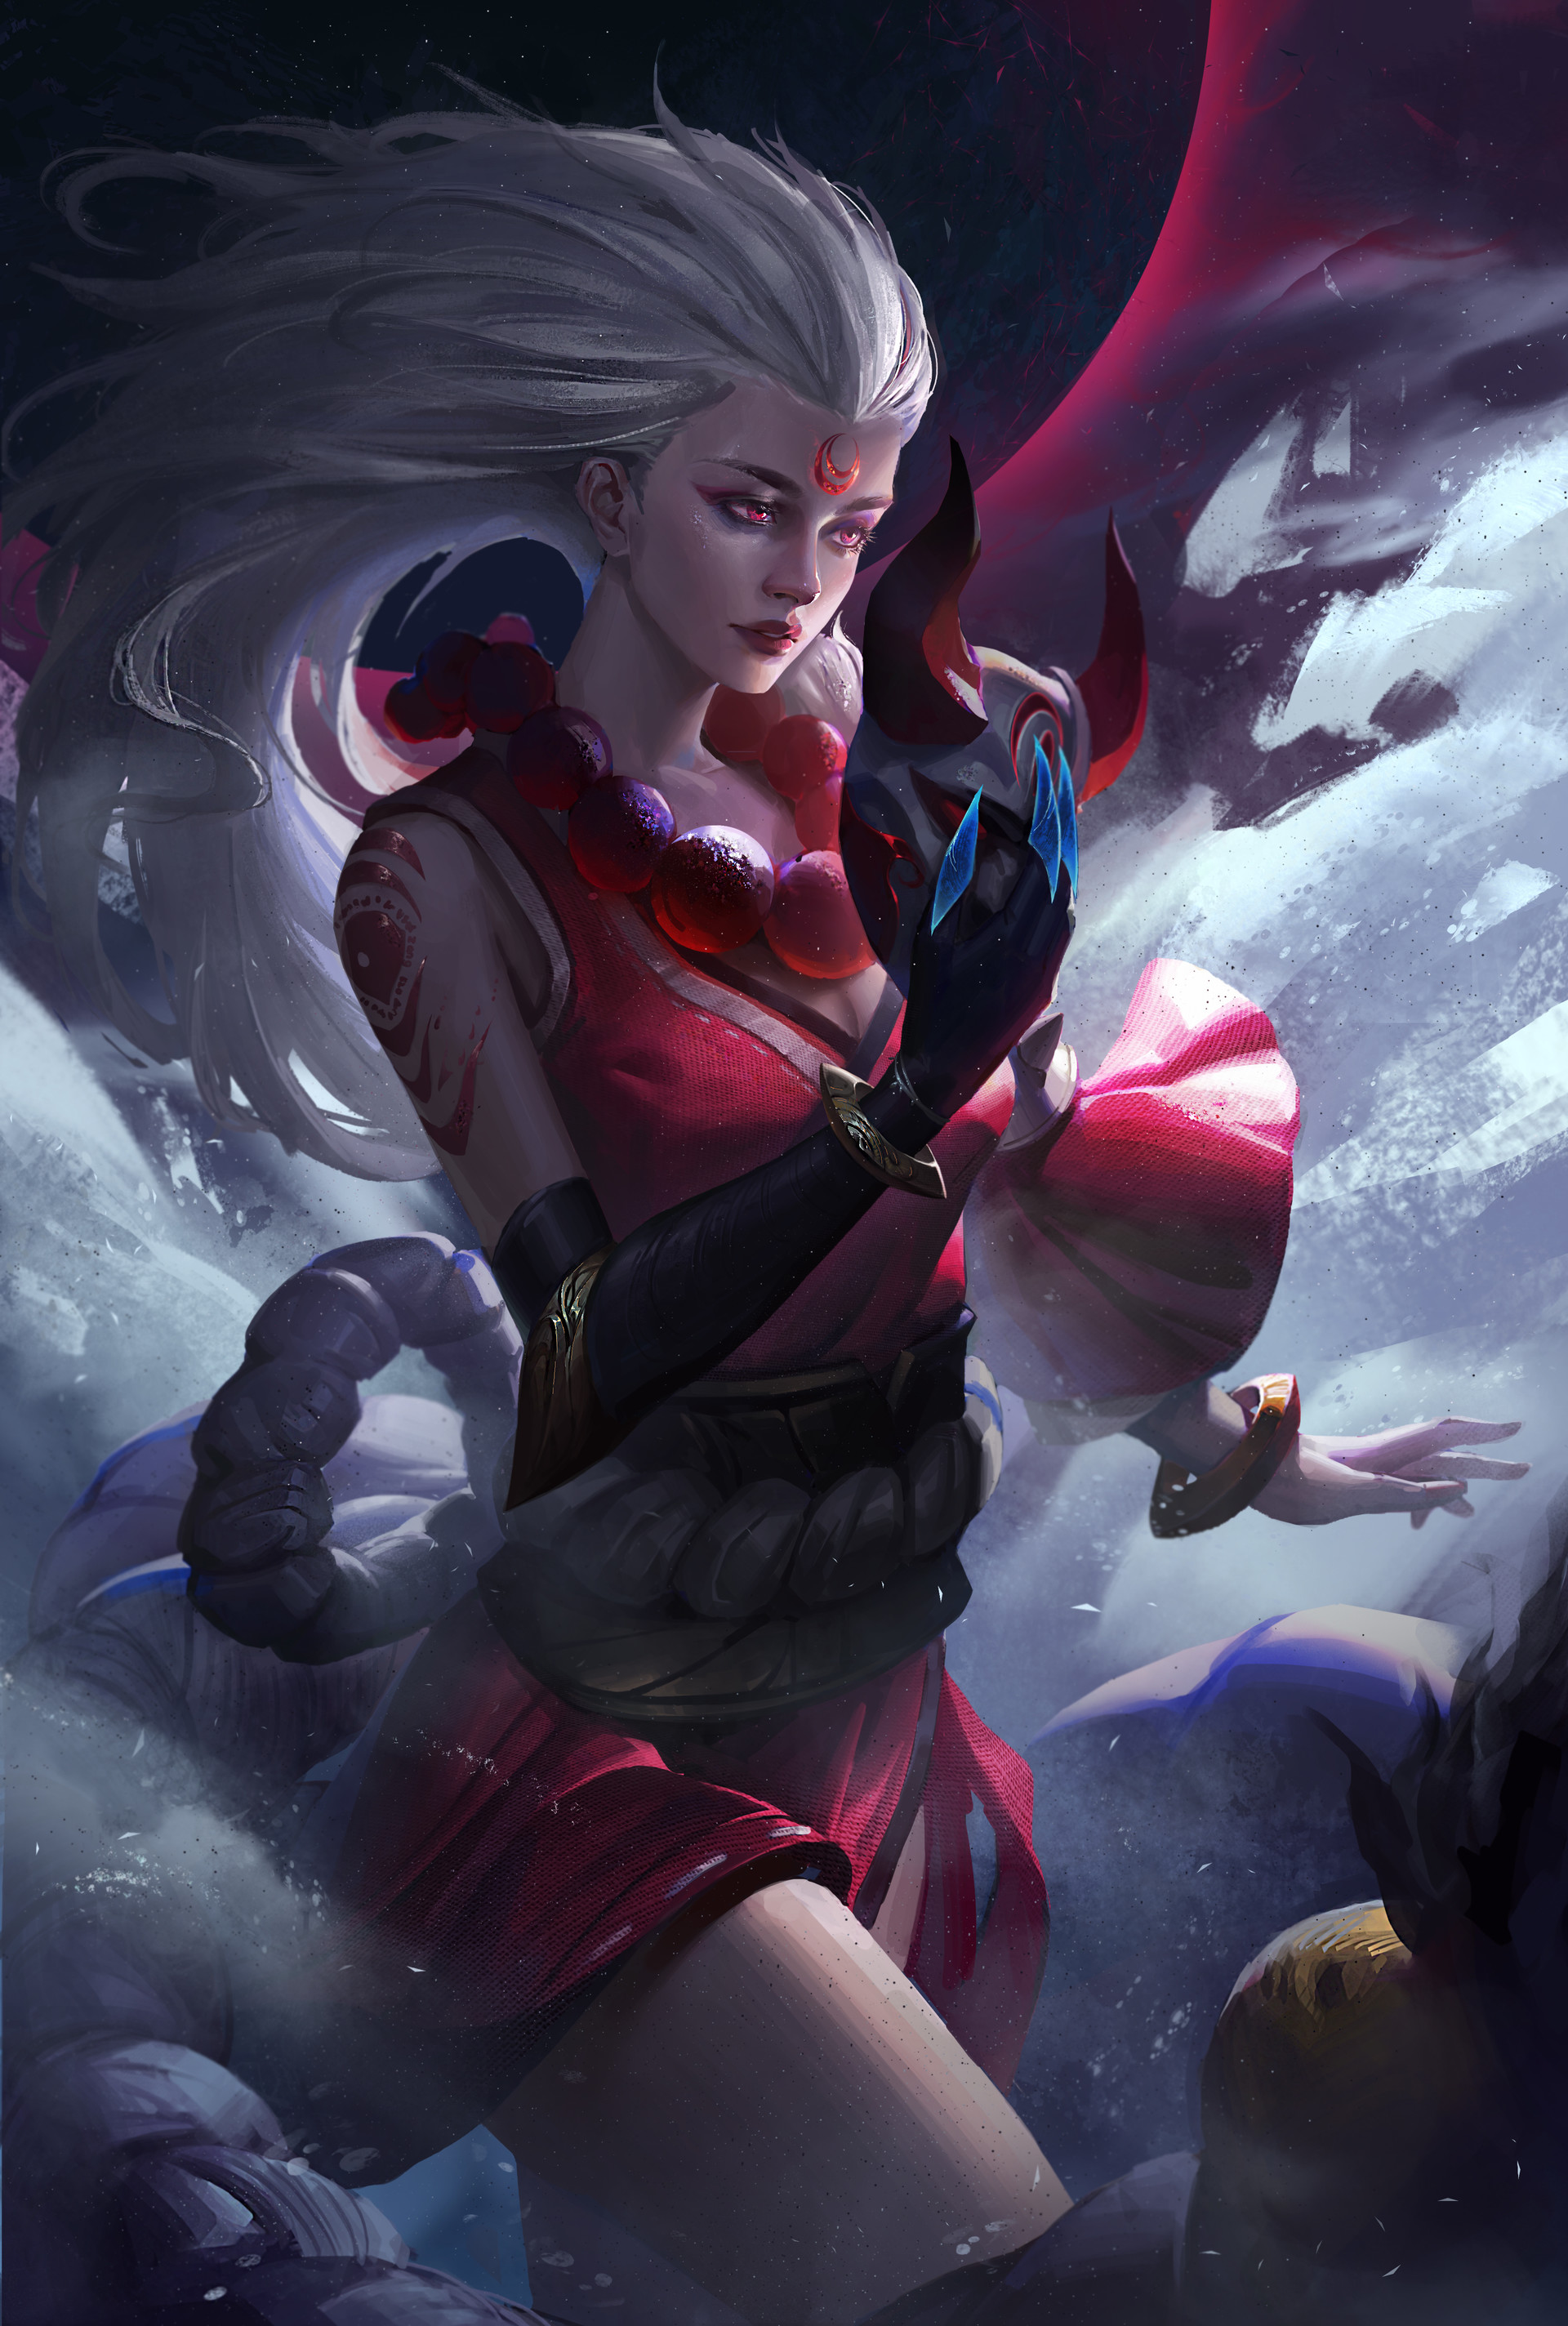 General 1920x2848 fantasy art magic warrior Diana (League of Legends) white hair long hair oni mask red clothing video game girls fantasy girl video game characters standing mask red eyes inked girls PC gaming red dress